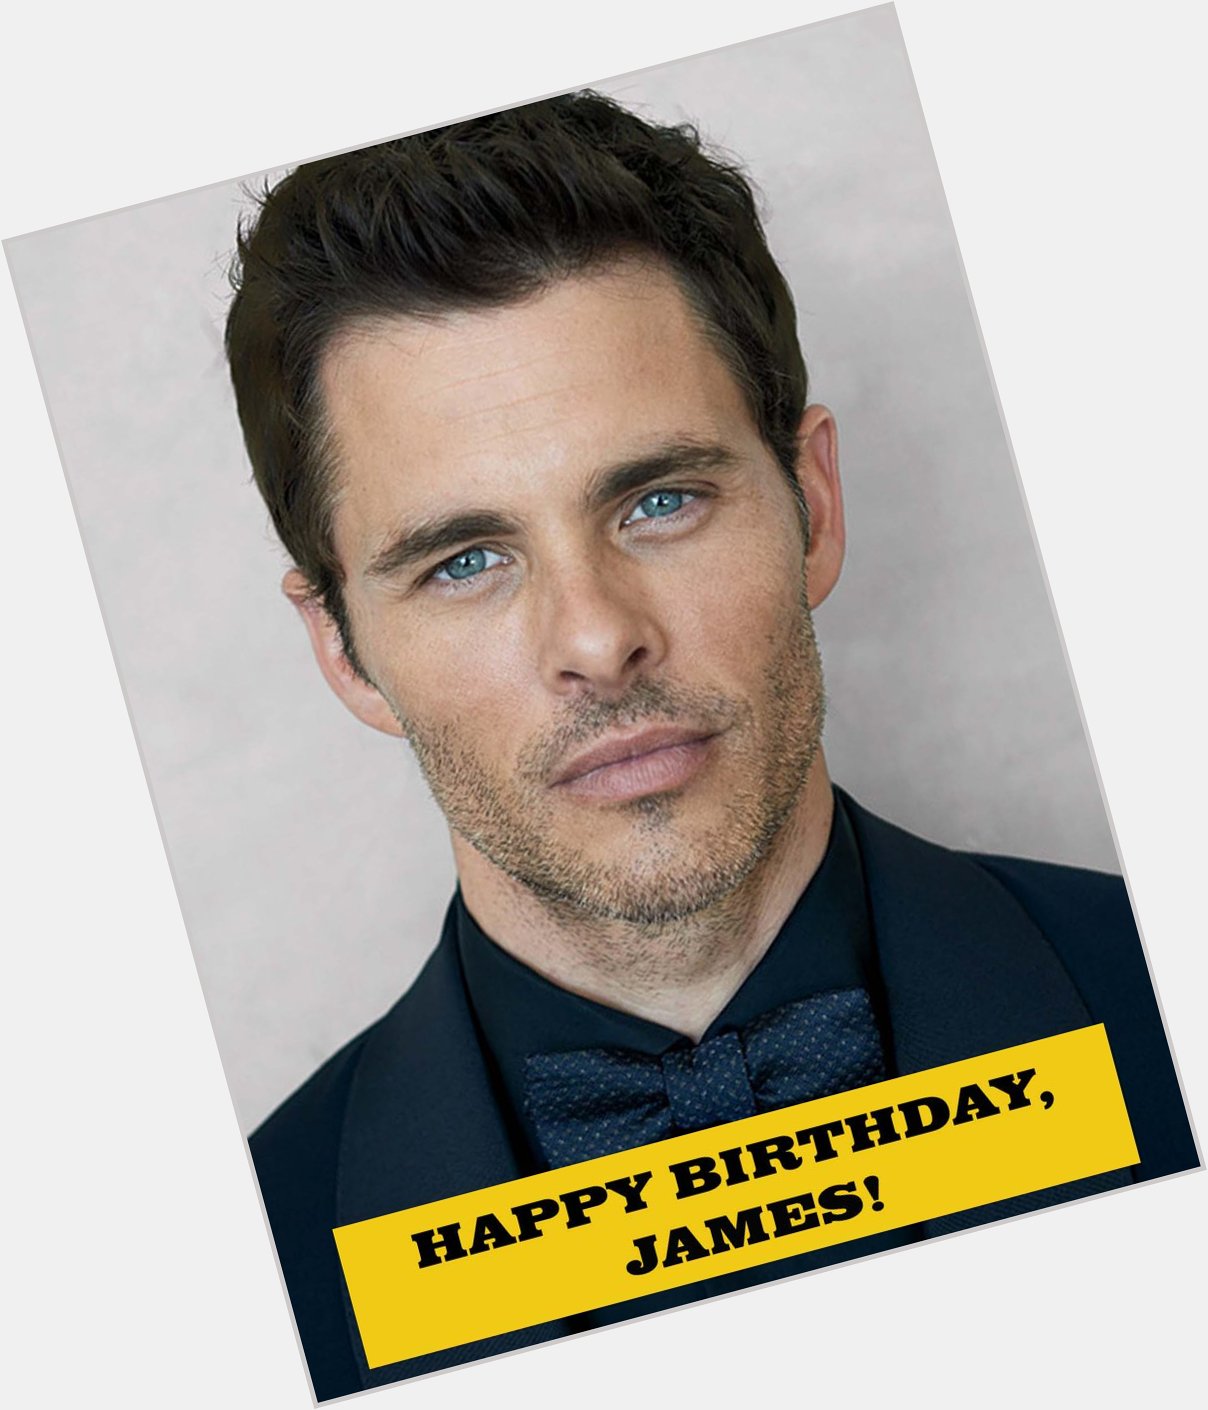 Movie Loft wishing a Happy Birthday to James Marsden. Catch him in the upcoming HBO series, Westworld\. 